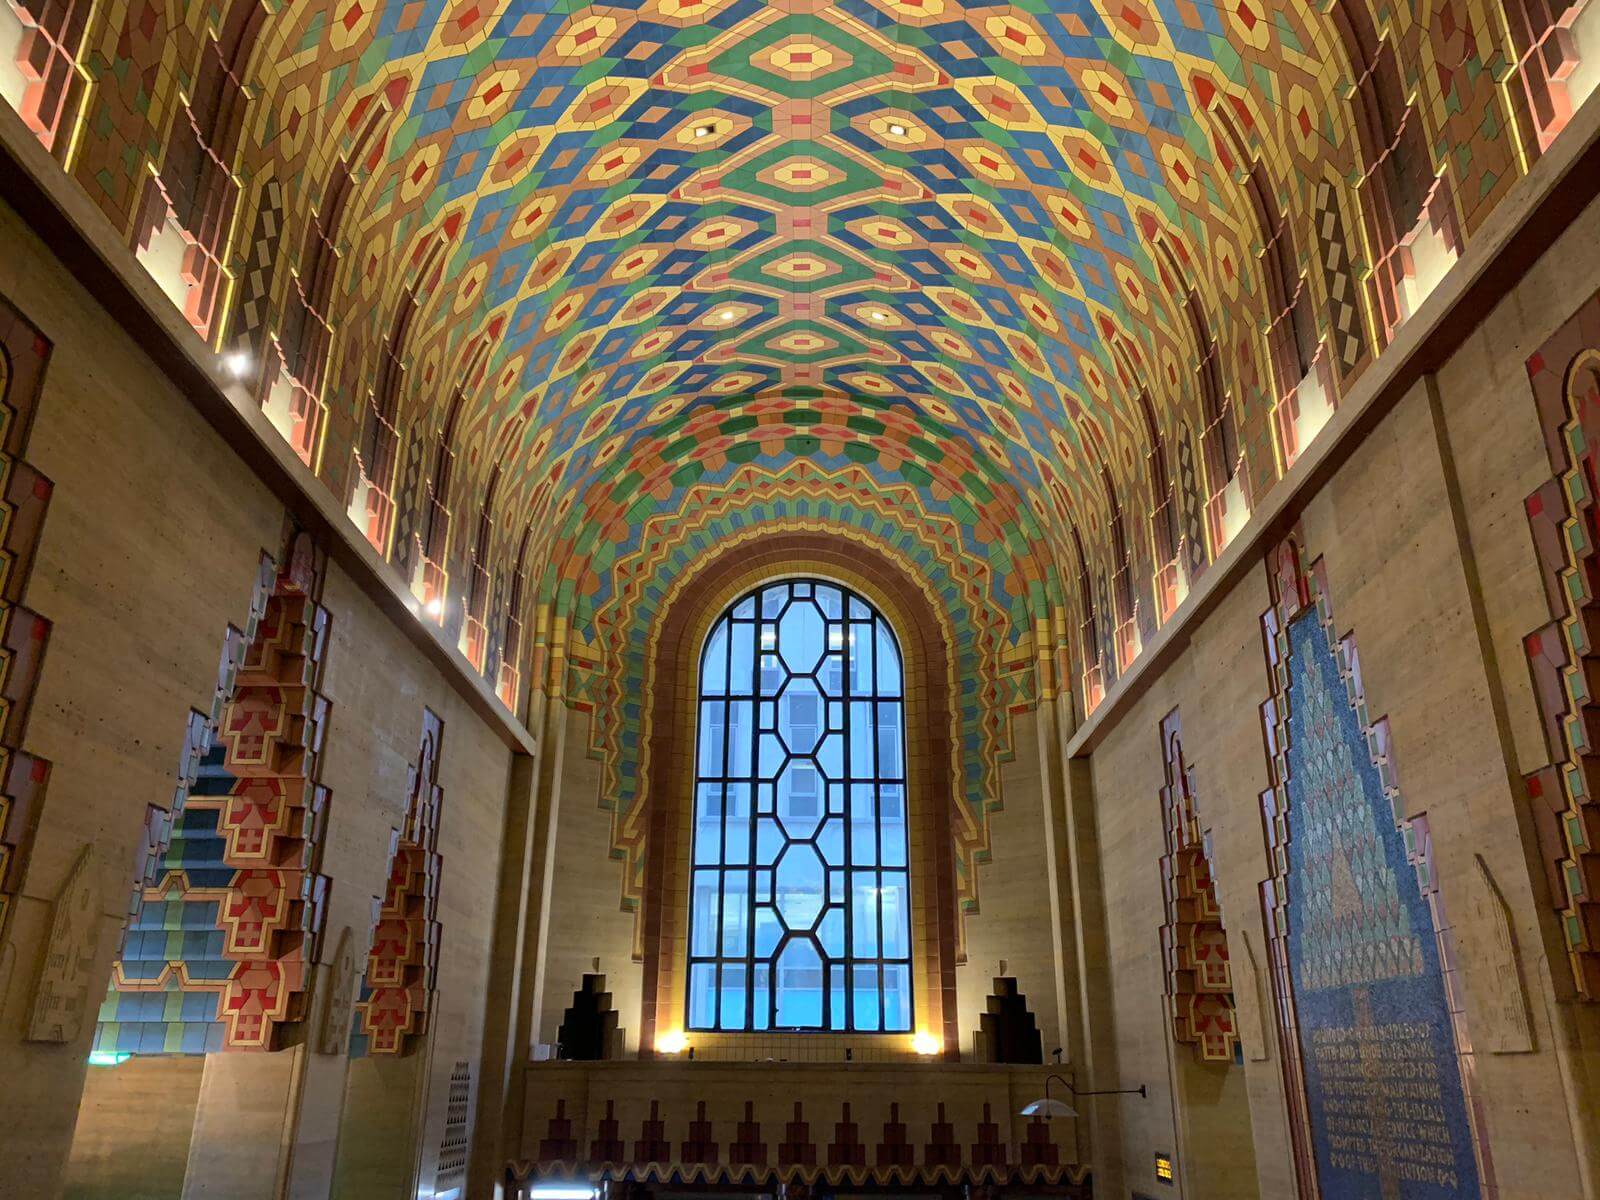 A colorful ceiling in downtown Detroit's Guardian building. ©EmanueleZambolin2019